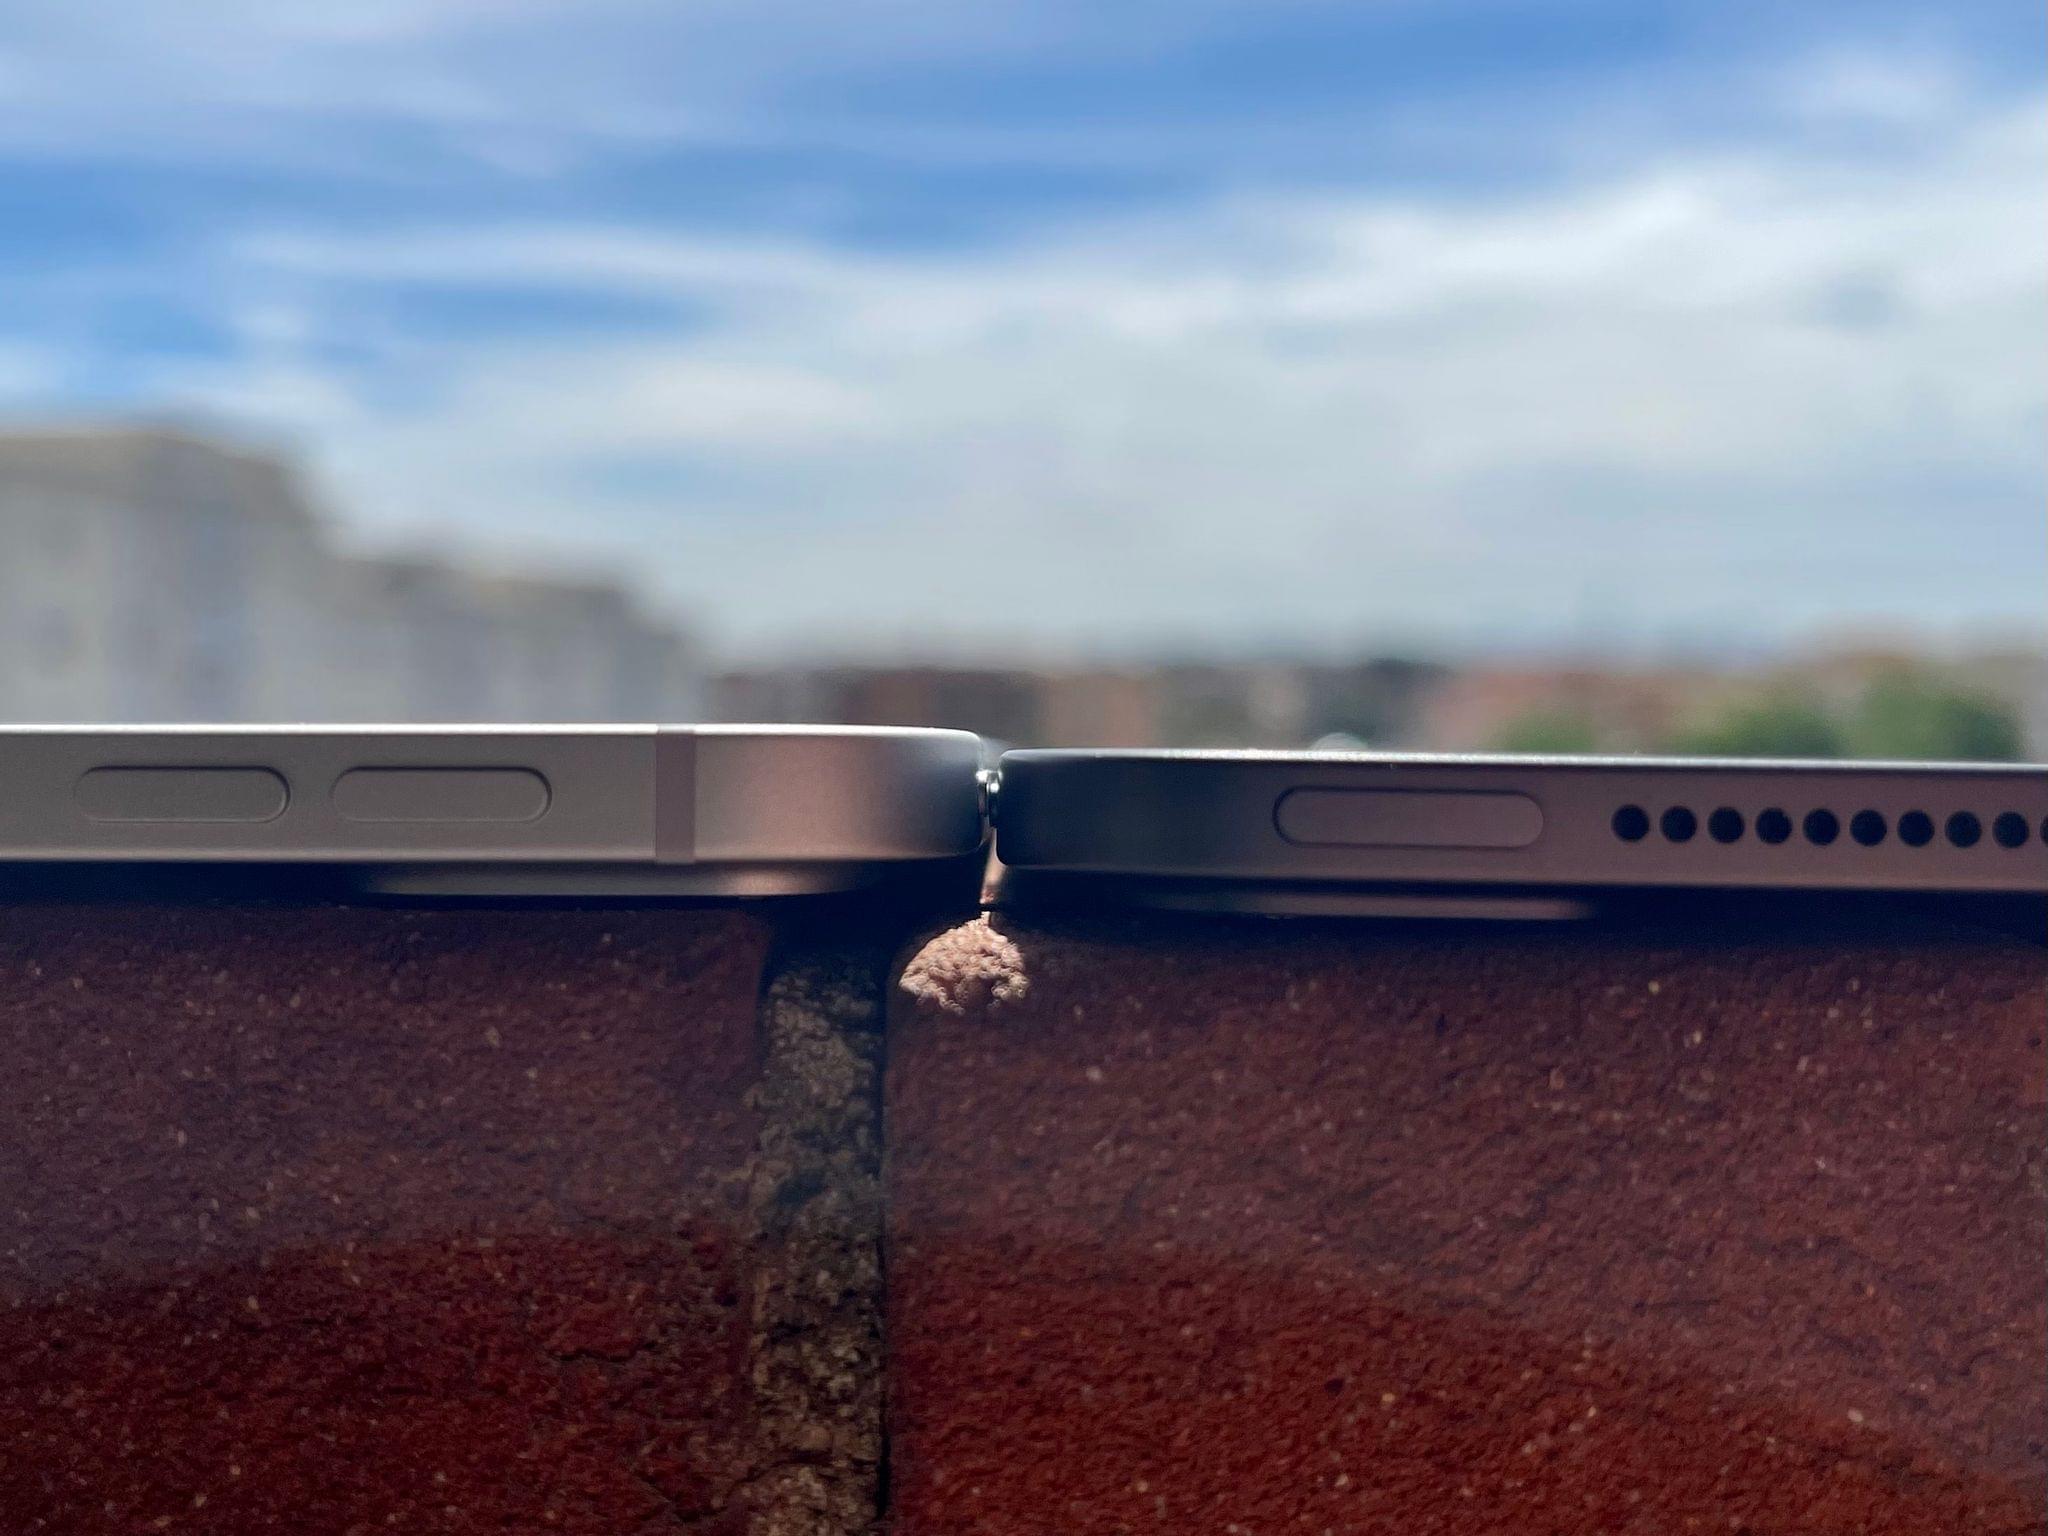 The new iPad Pro (left) is 0.5mm thicker than the previous model.